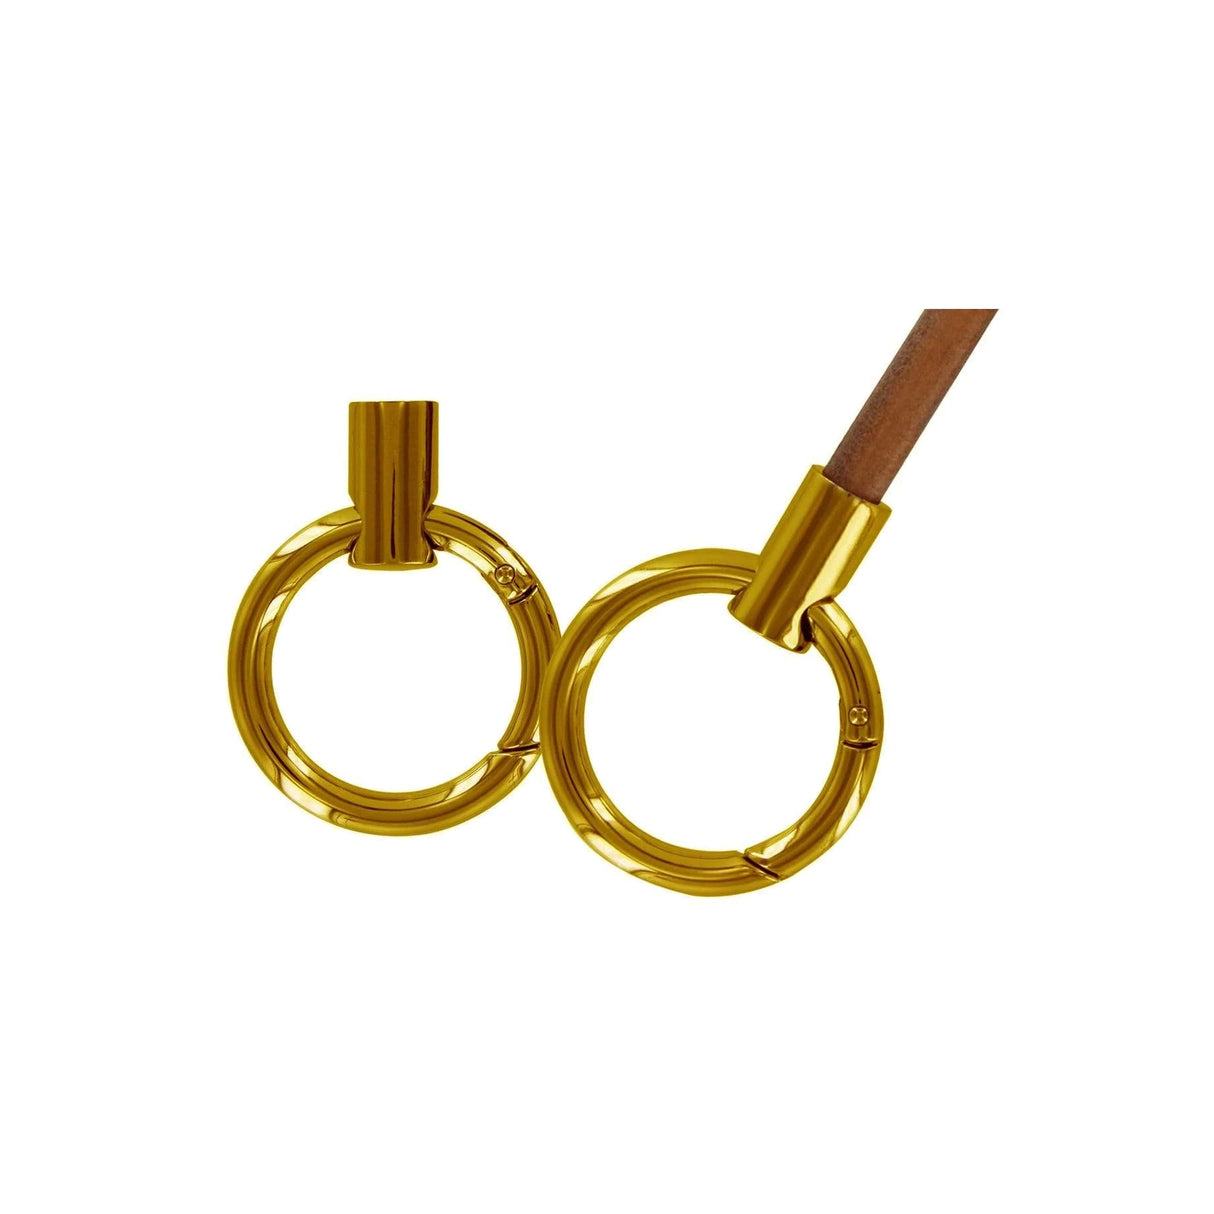 1 1/4"Shiny Gold, Gate Ring with Strap End, Zinc Alloy, #P-3145-GOLD